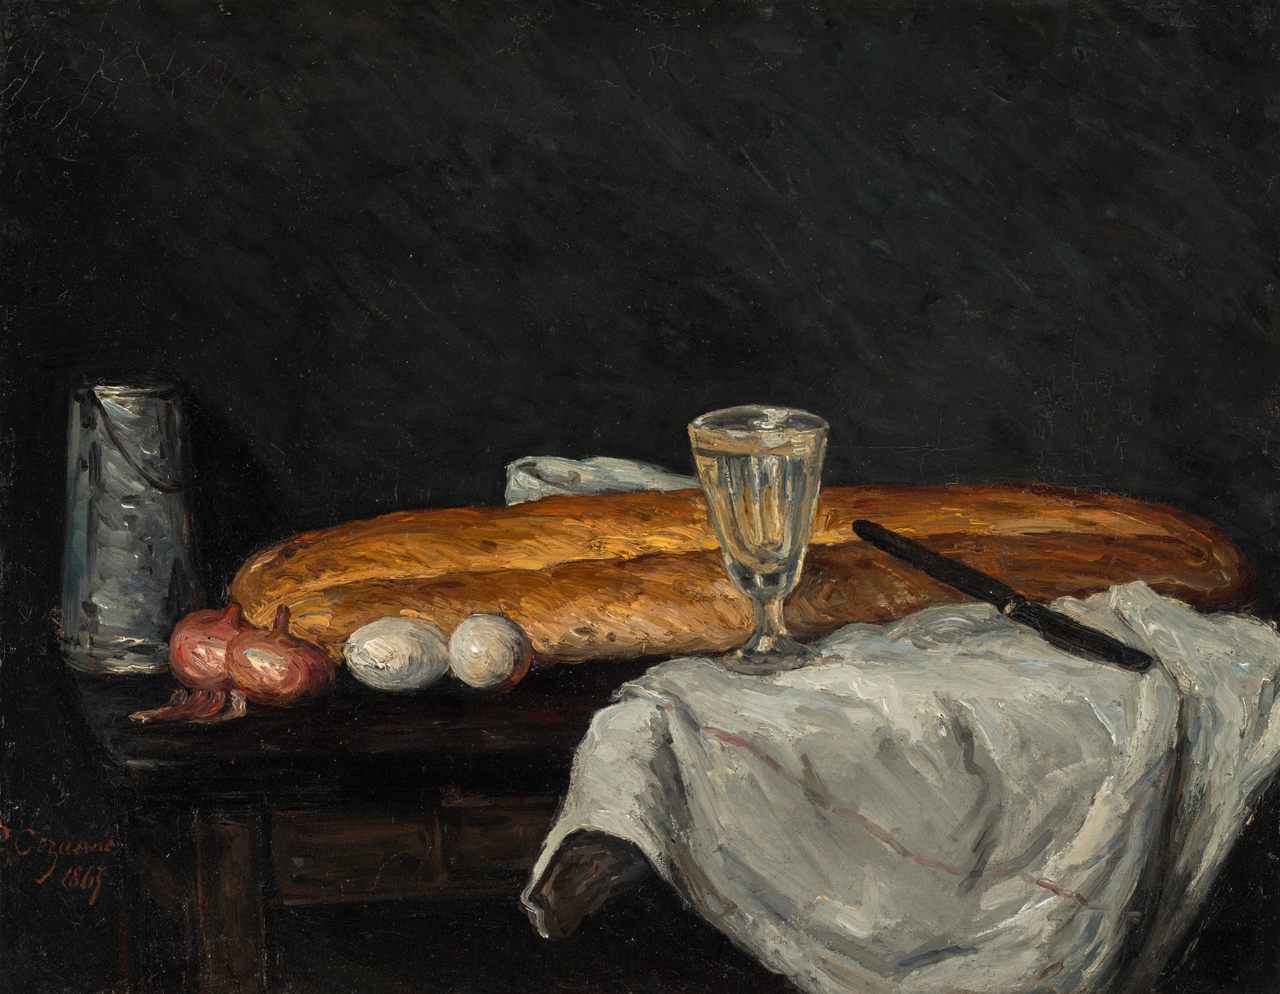 <em>Still Life With Bread and Eggs</em> (1865) is considered Cézanne's earliest still life masterpiece.